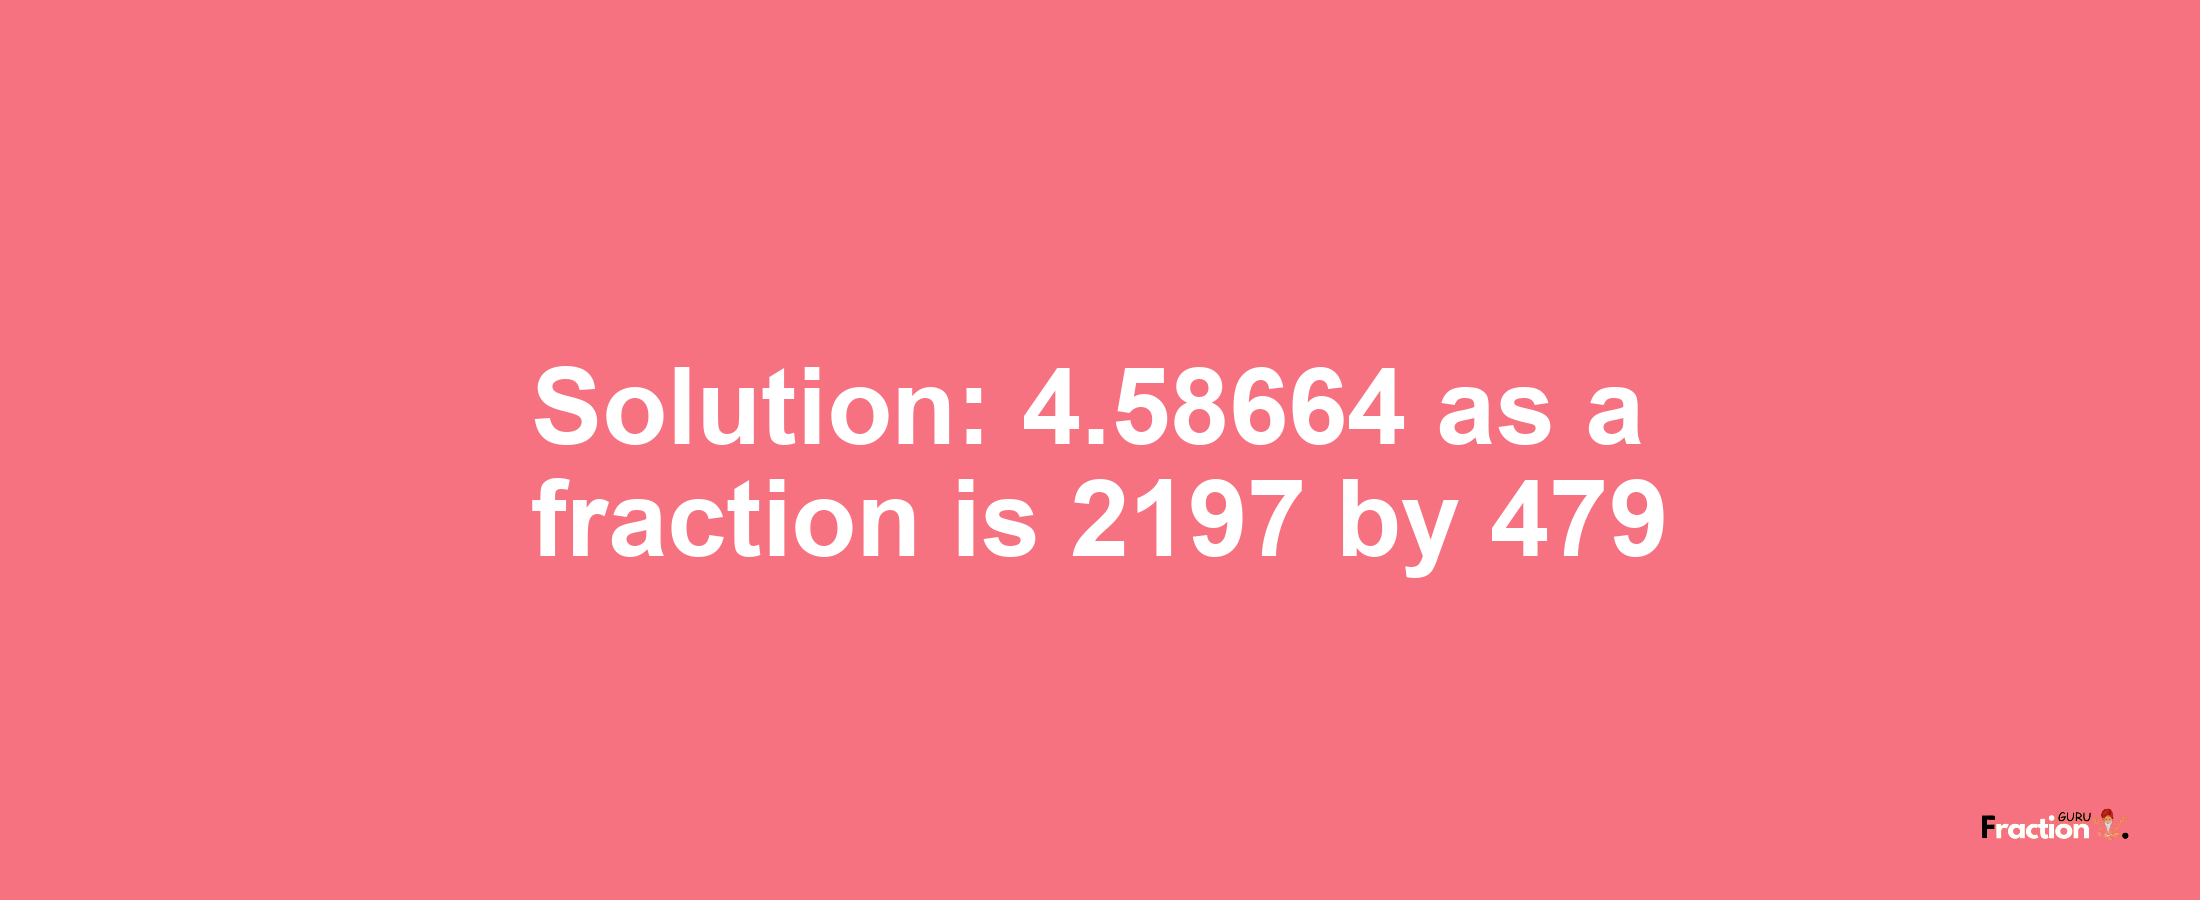 Solution:4.58664 as a fraction is 2197/479